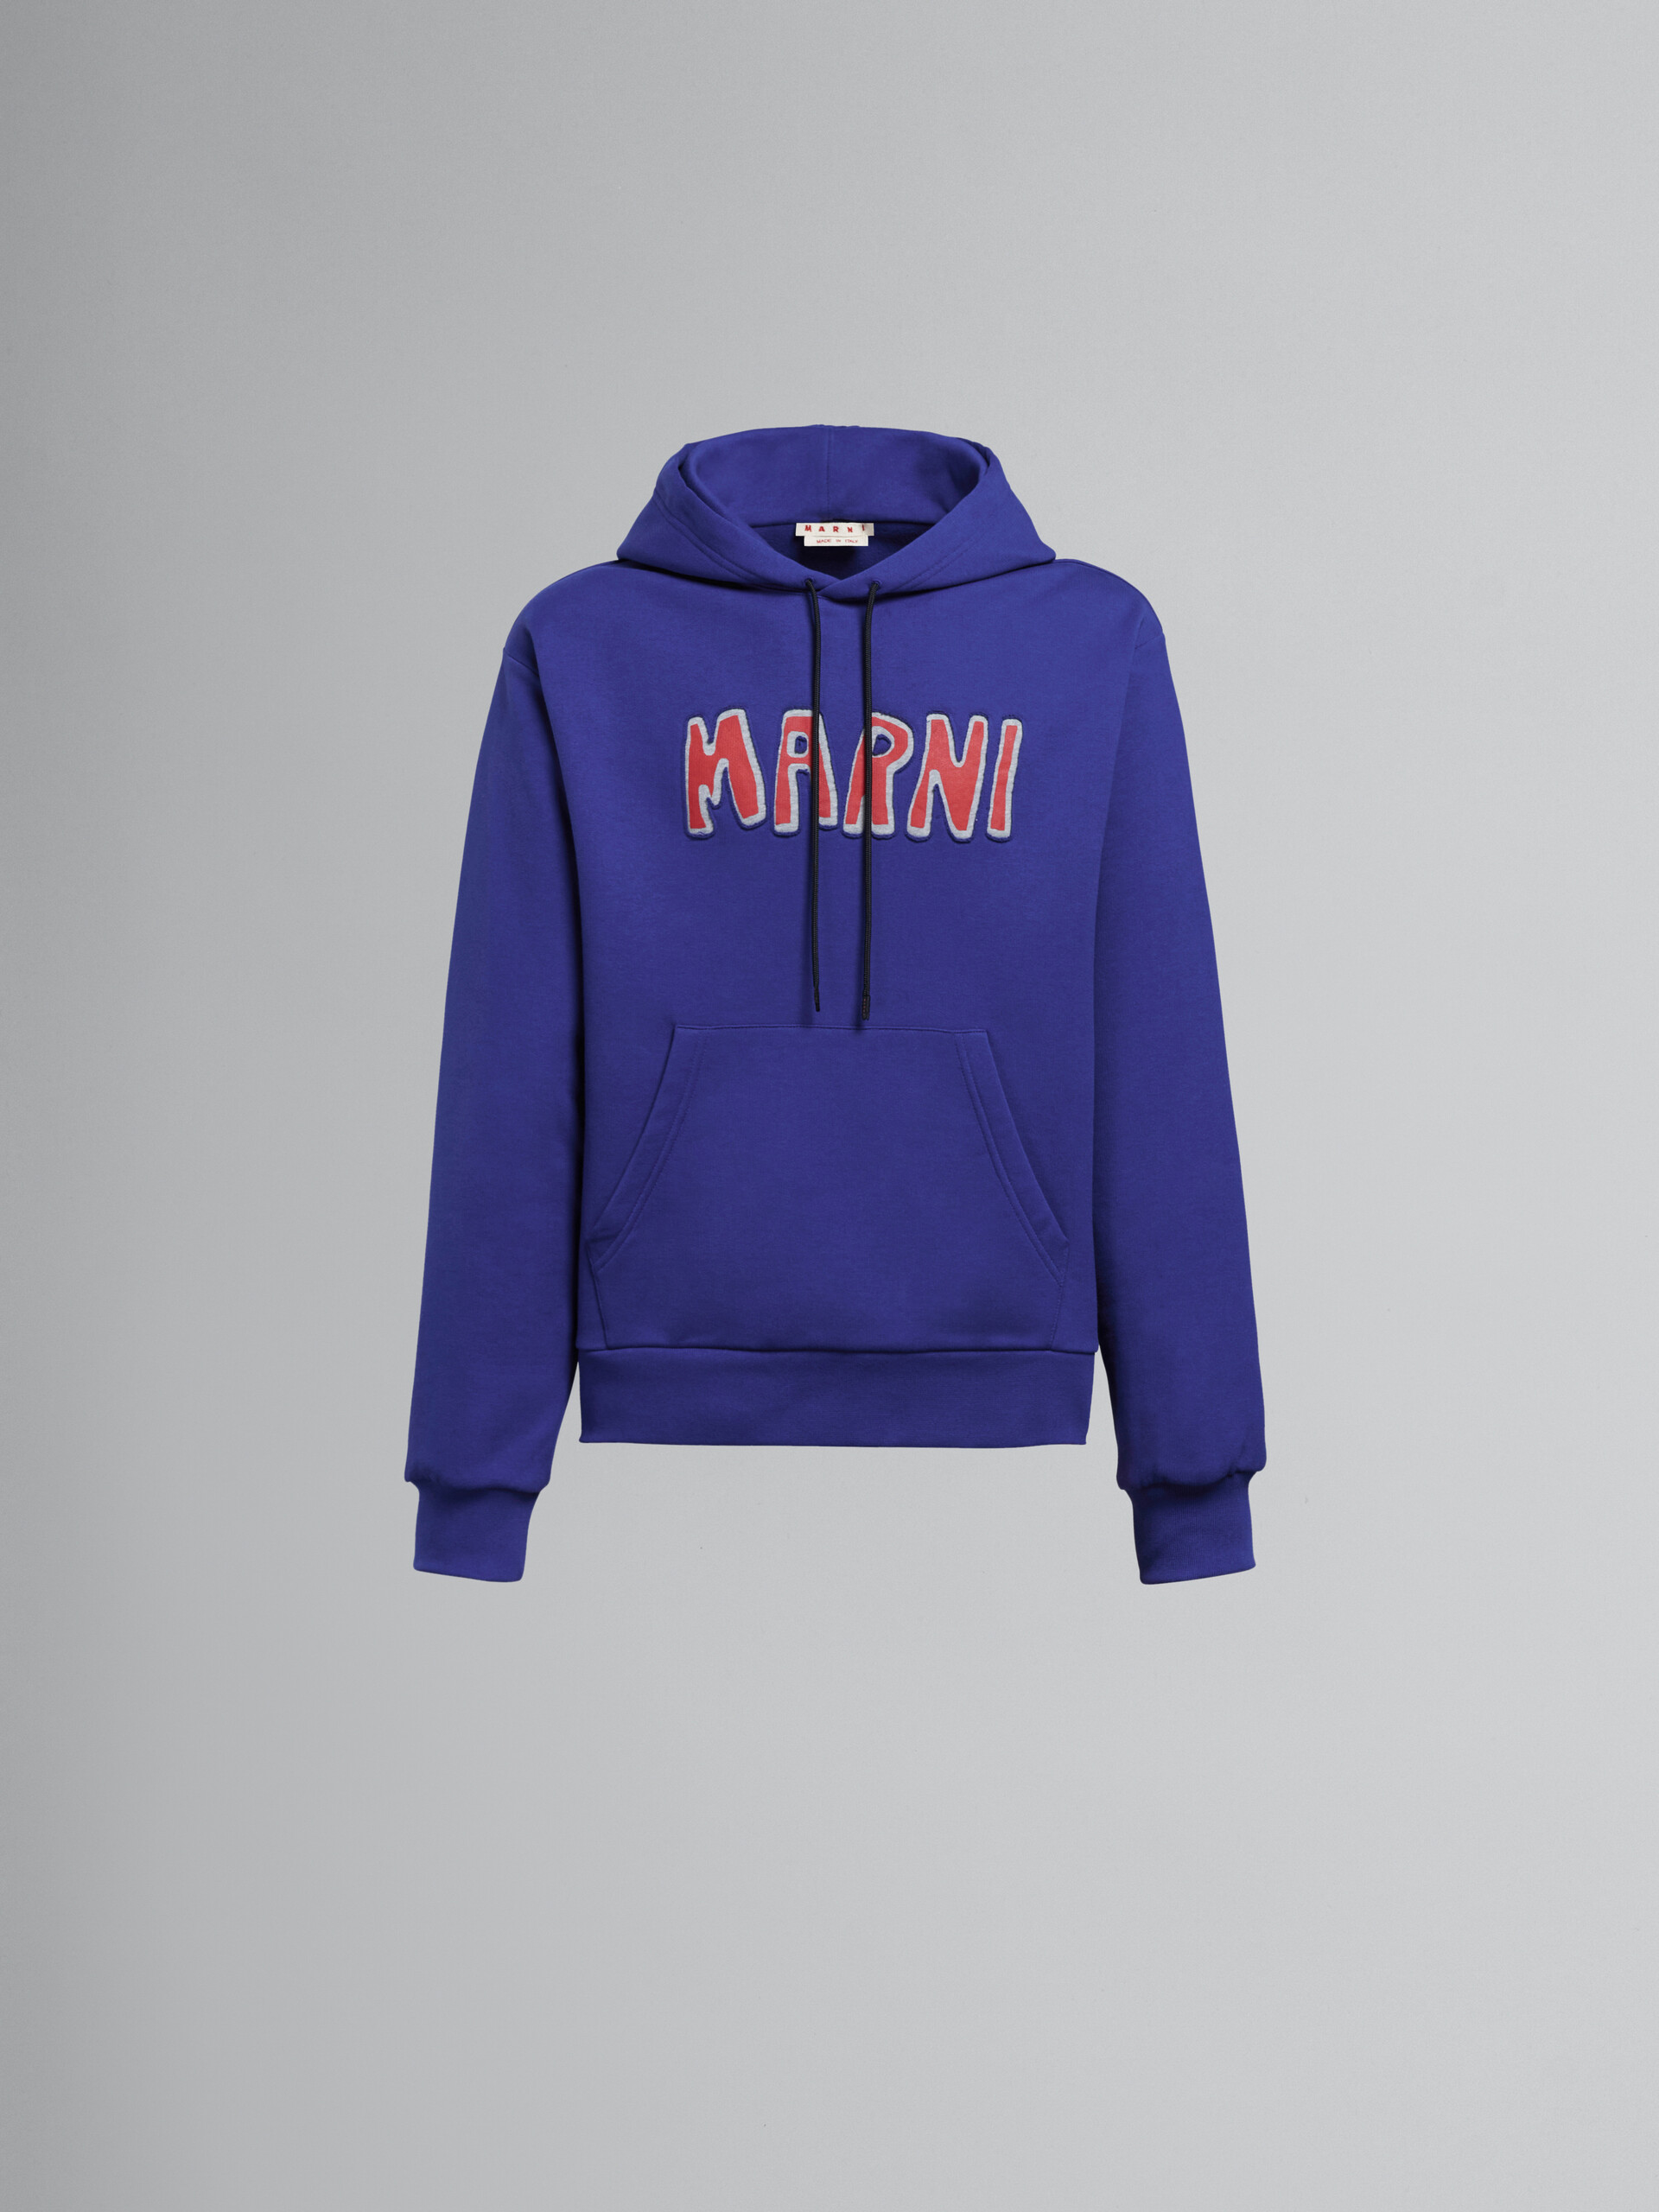 Blue hoodie with logo - Sweaters - Image 1